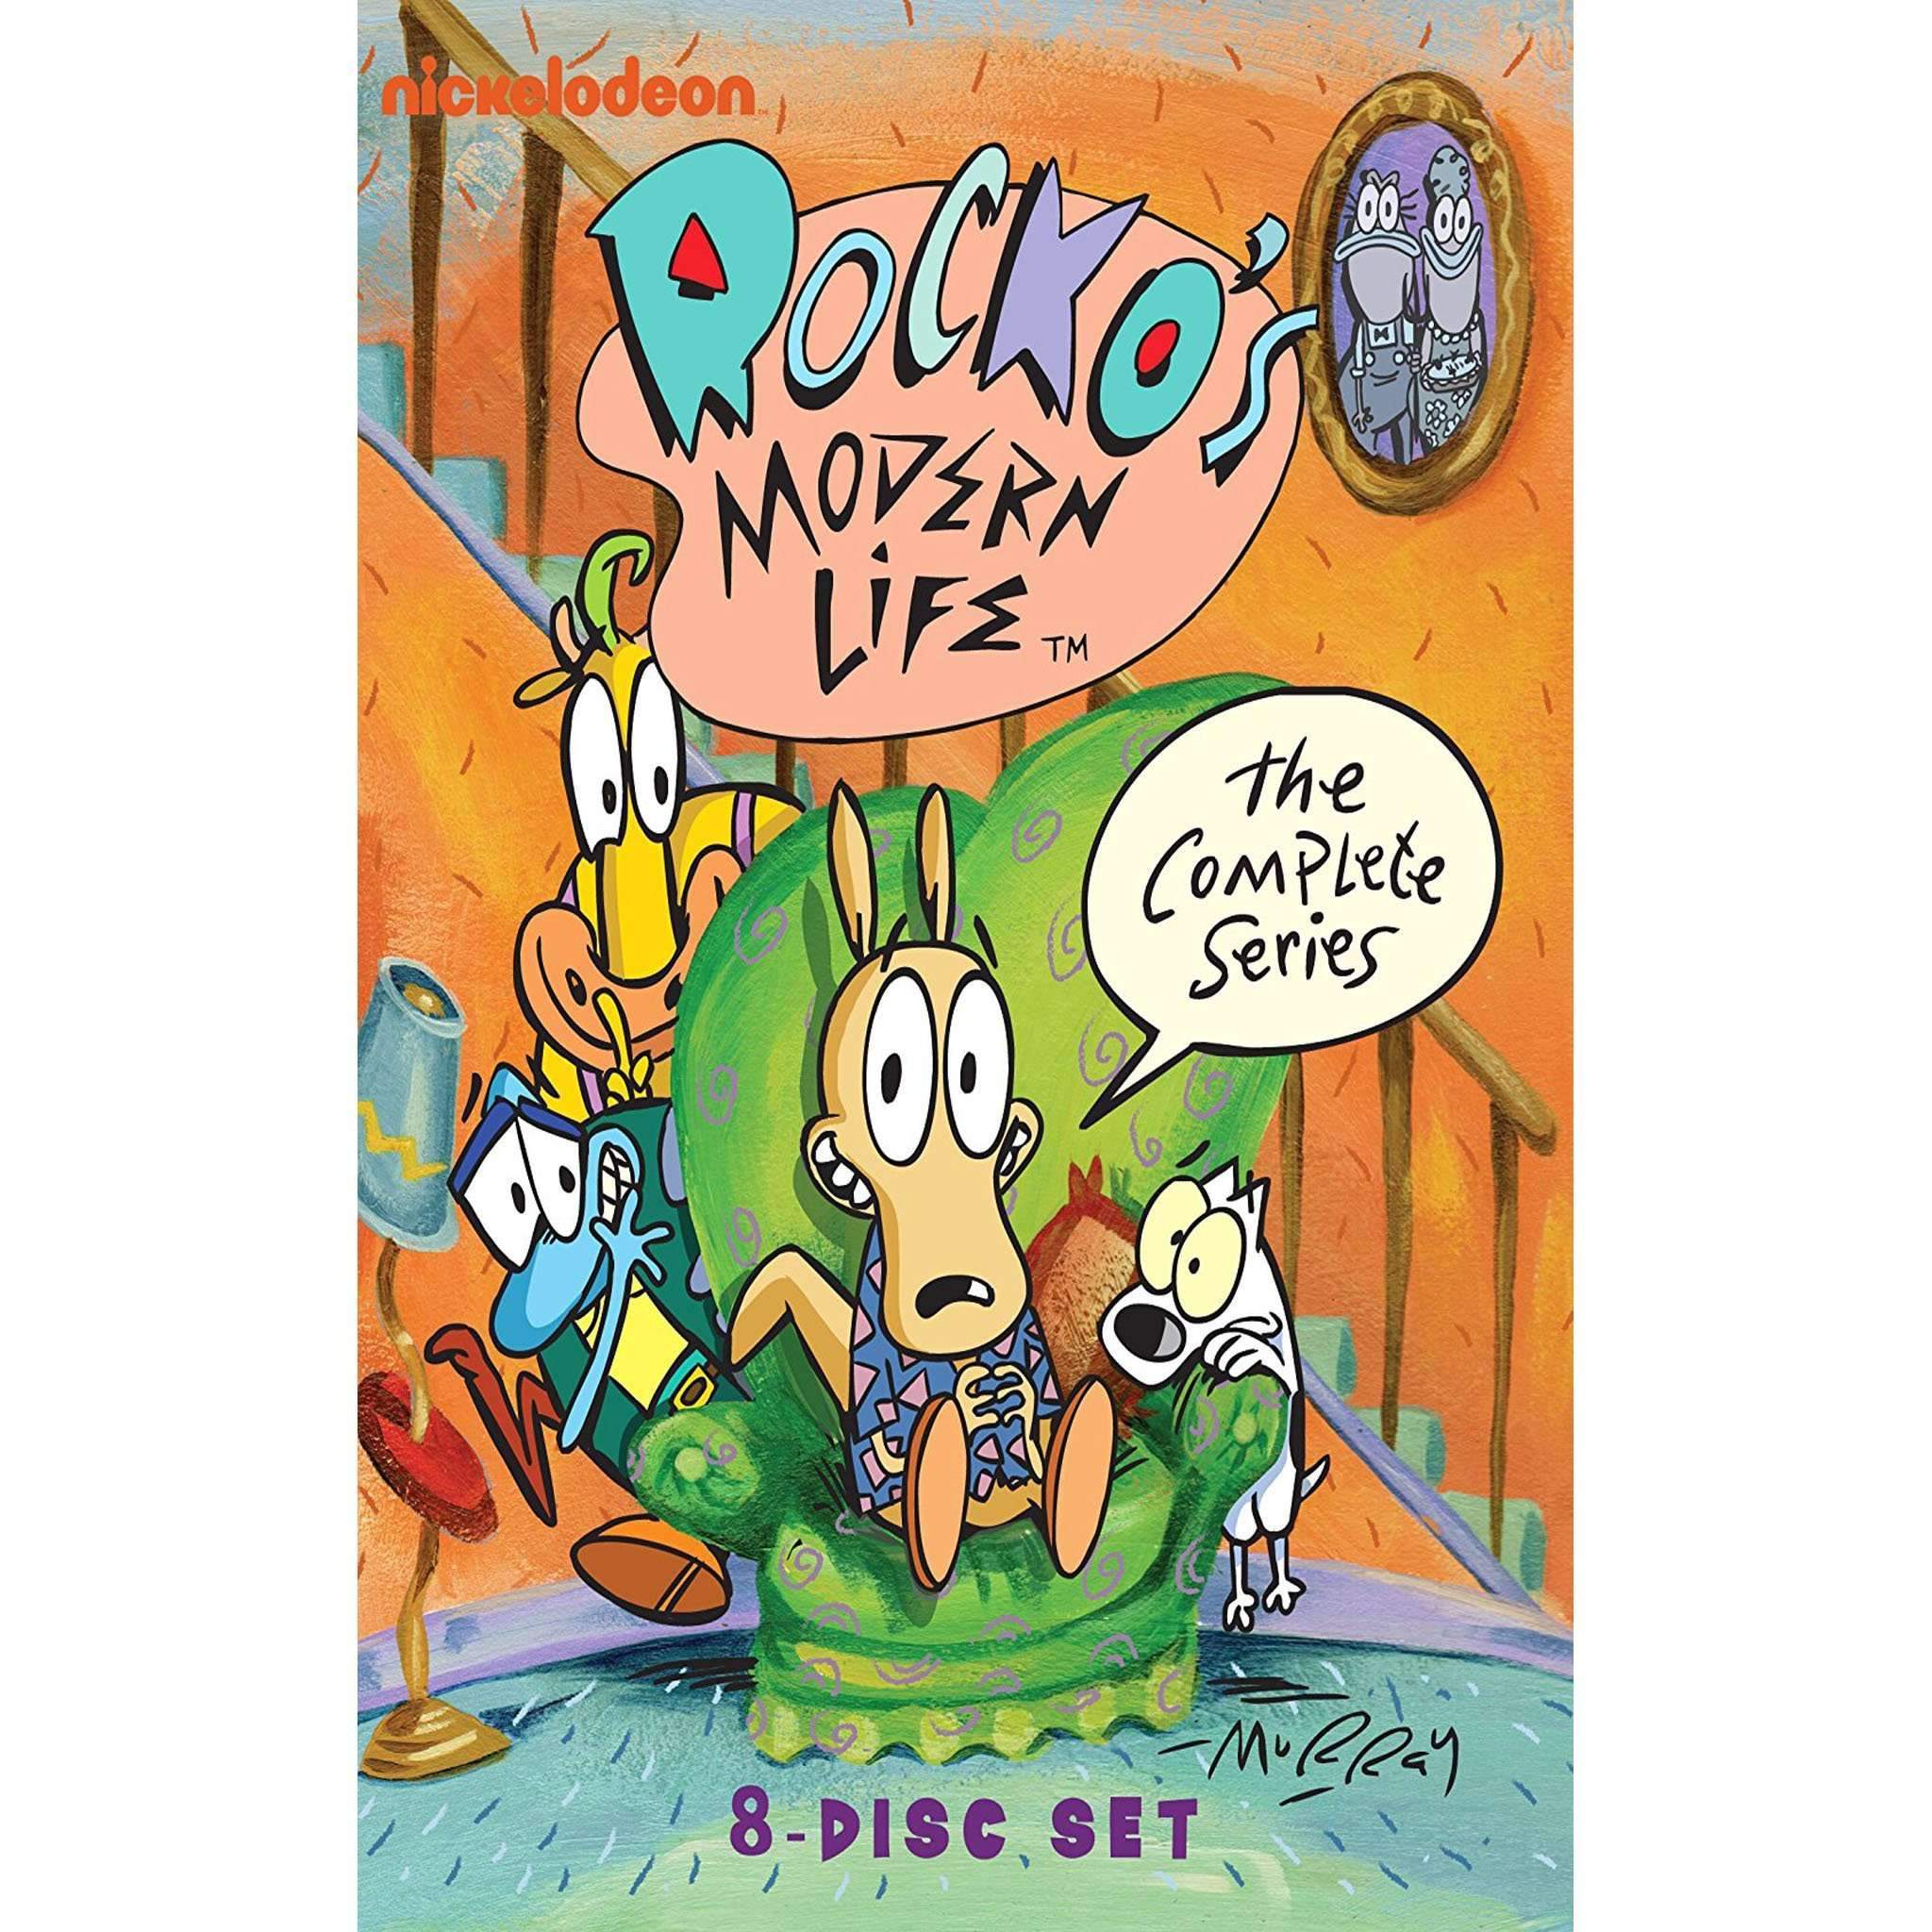 Rocko's Modern Life DVD Complete Series Box Set Shout! Factory DVDs & Blu-ray Discs > DVDs > Box Sets